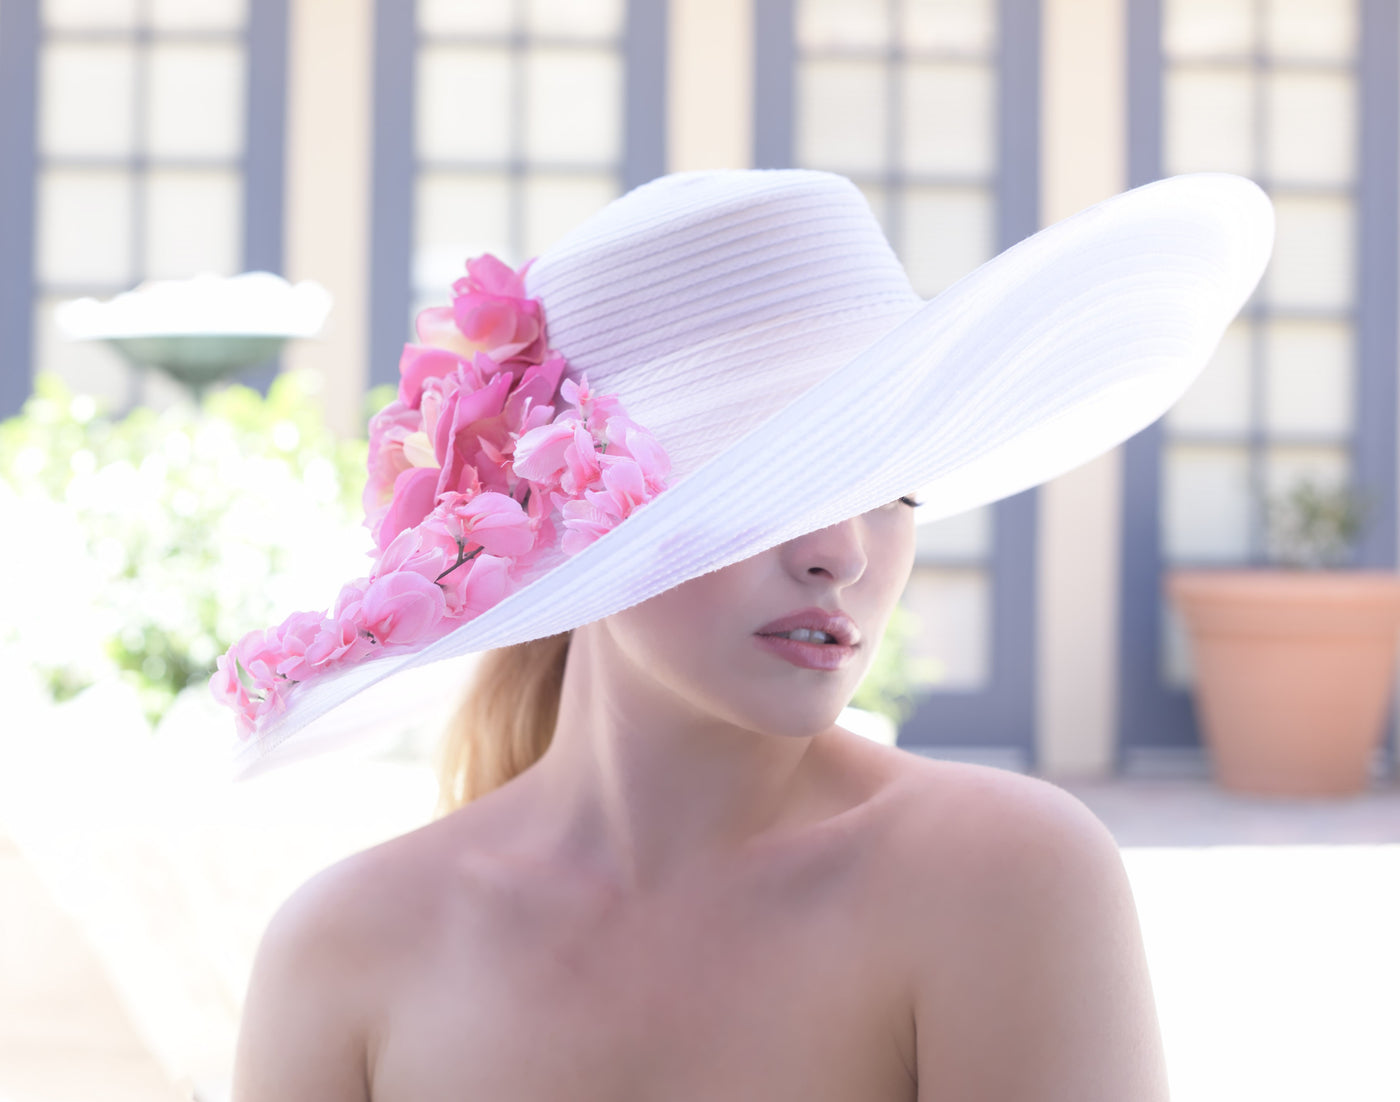 Princess Carol Hat by Louisa Voisine Millinery - SOLD OUT